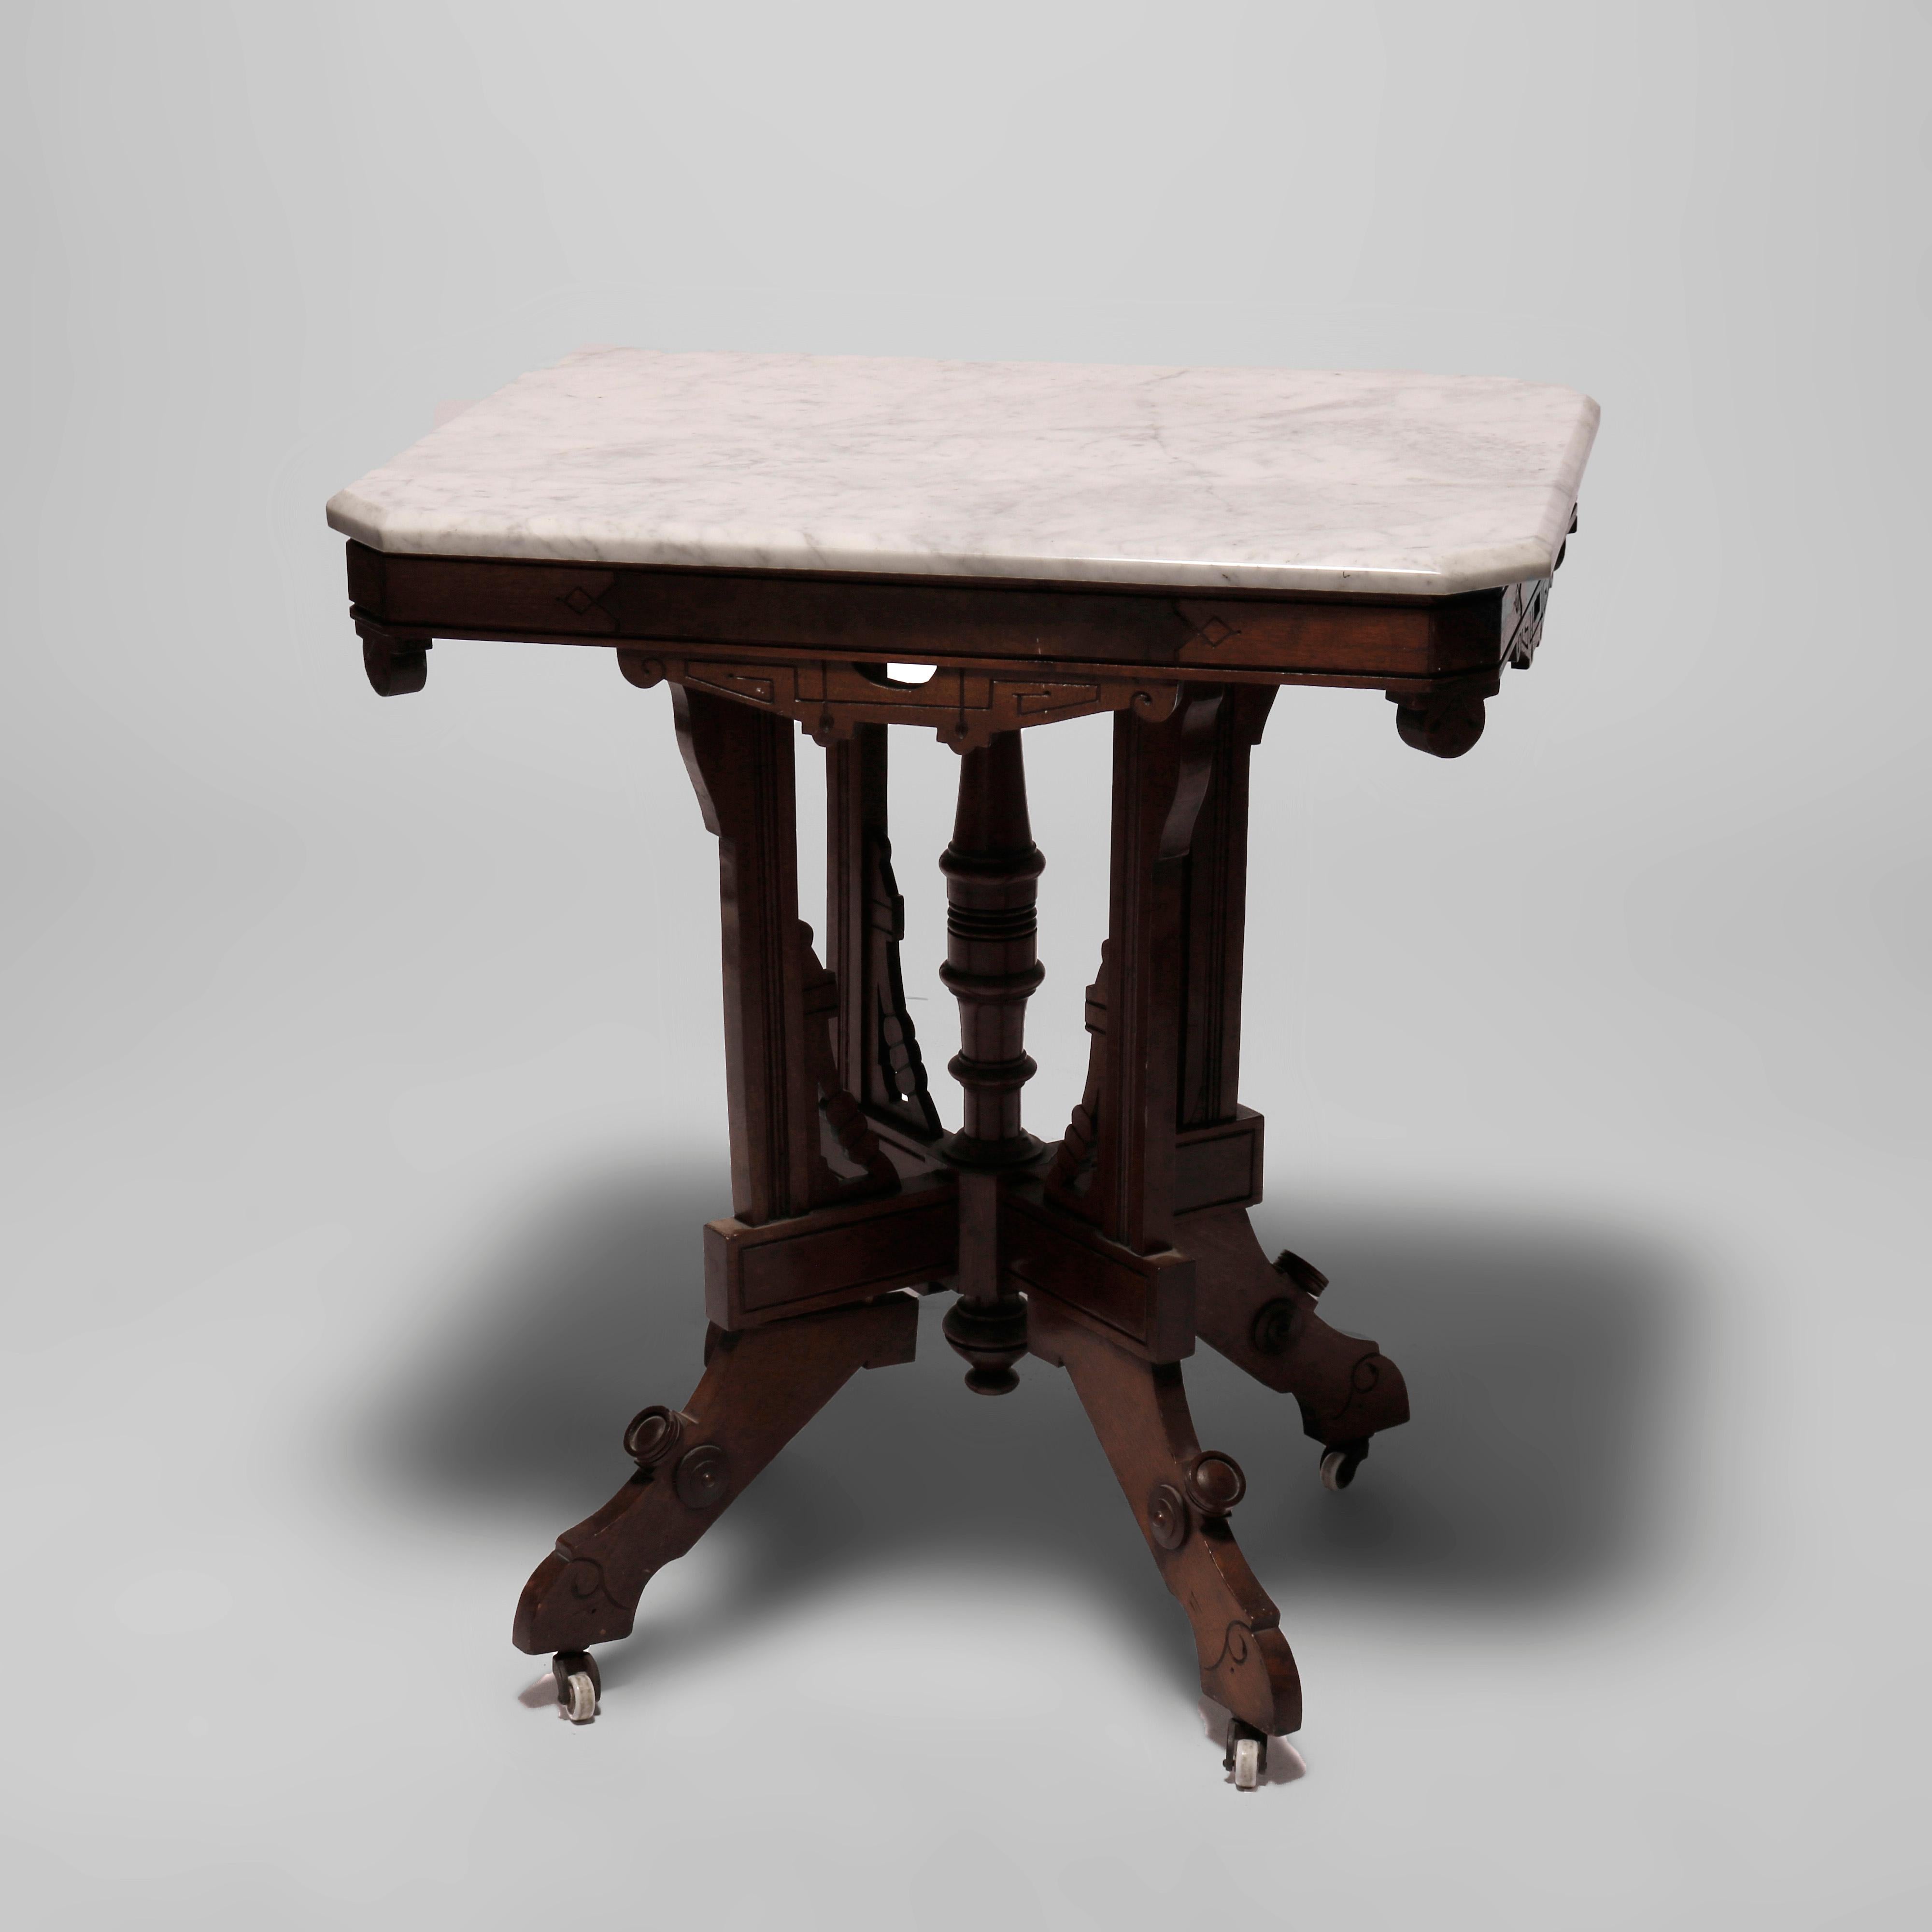 An antique Eastlake parlor table offers beveled clip-corner marble top over walnut base having burl insets, shaped skirt, four supports with decorative corbels surrounding turned column, and raised on stylized cabriole legs, incised decoration